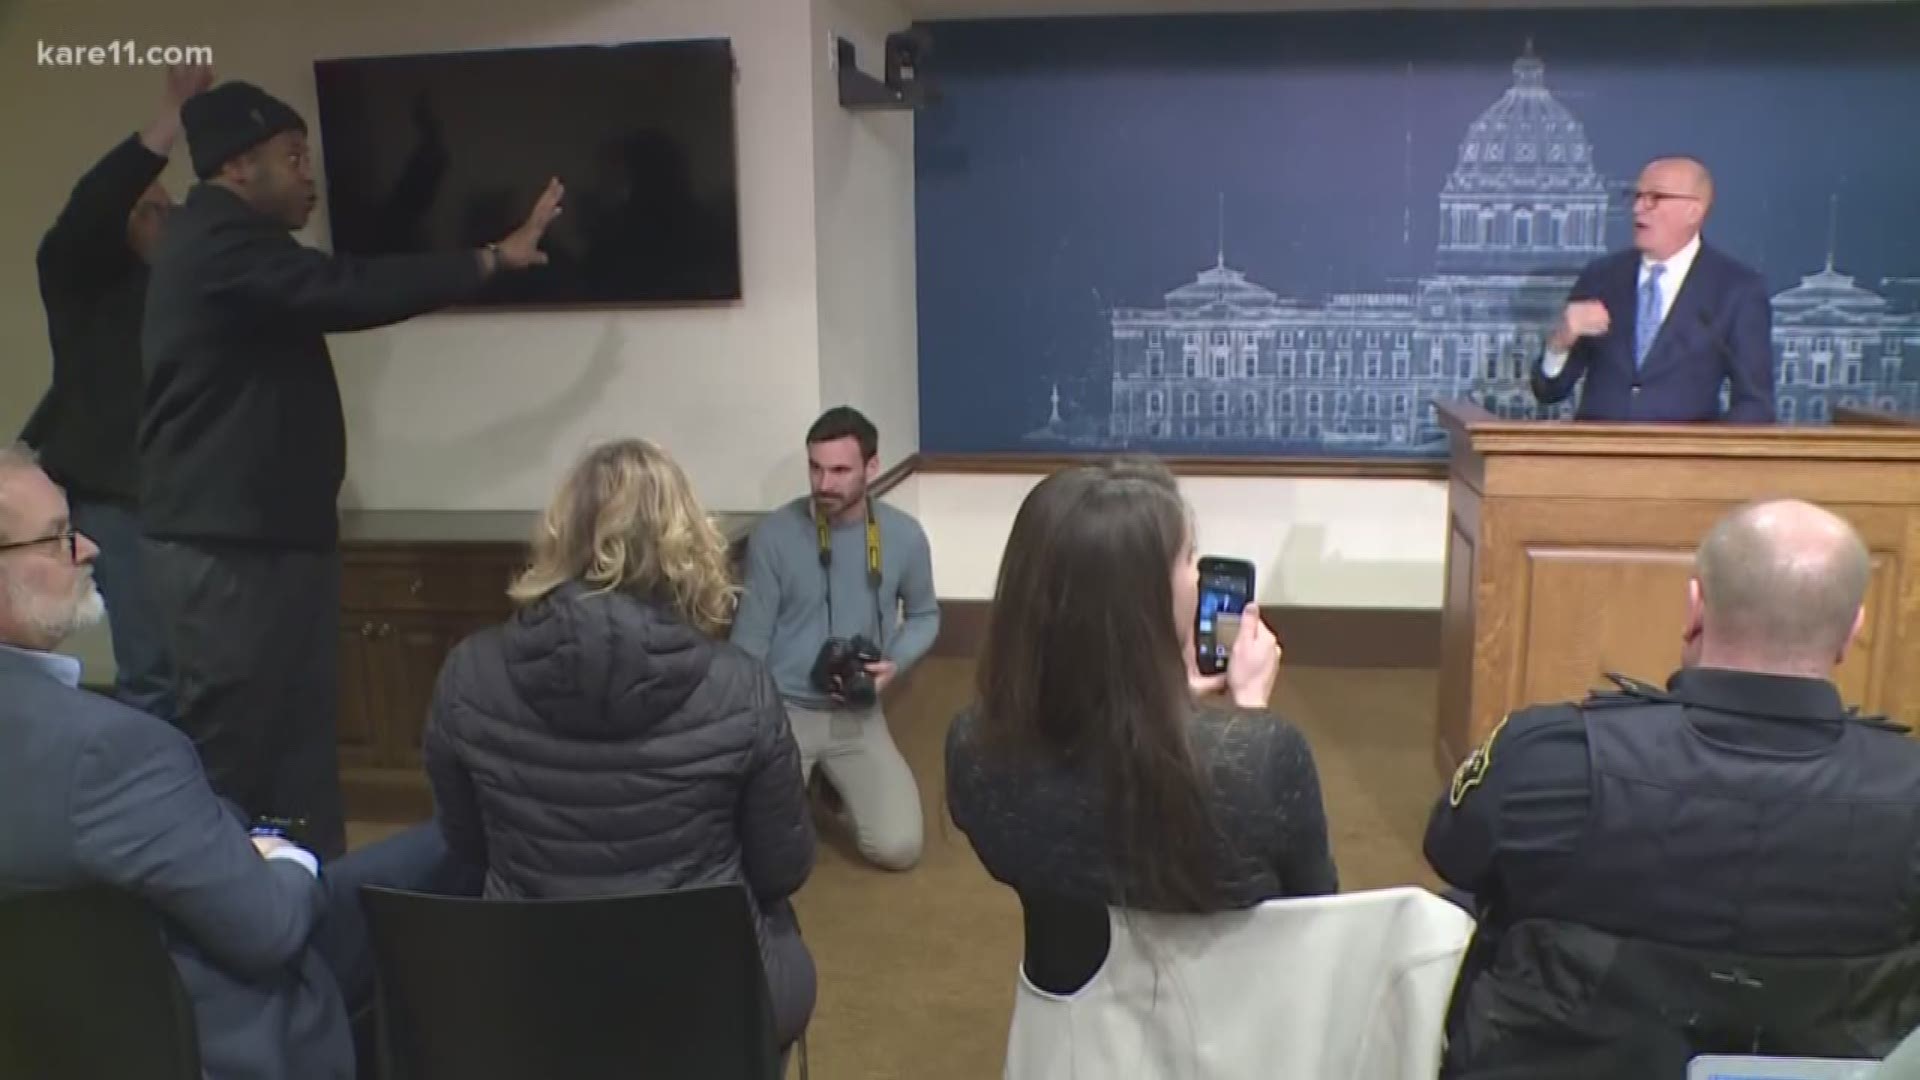 A news conference called by opponents of legalization Wednesday was marked by heckling from marijuana supporters before ending in a shouting match. https://kare11.tv/2RQusQ1